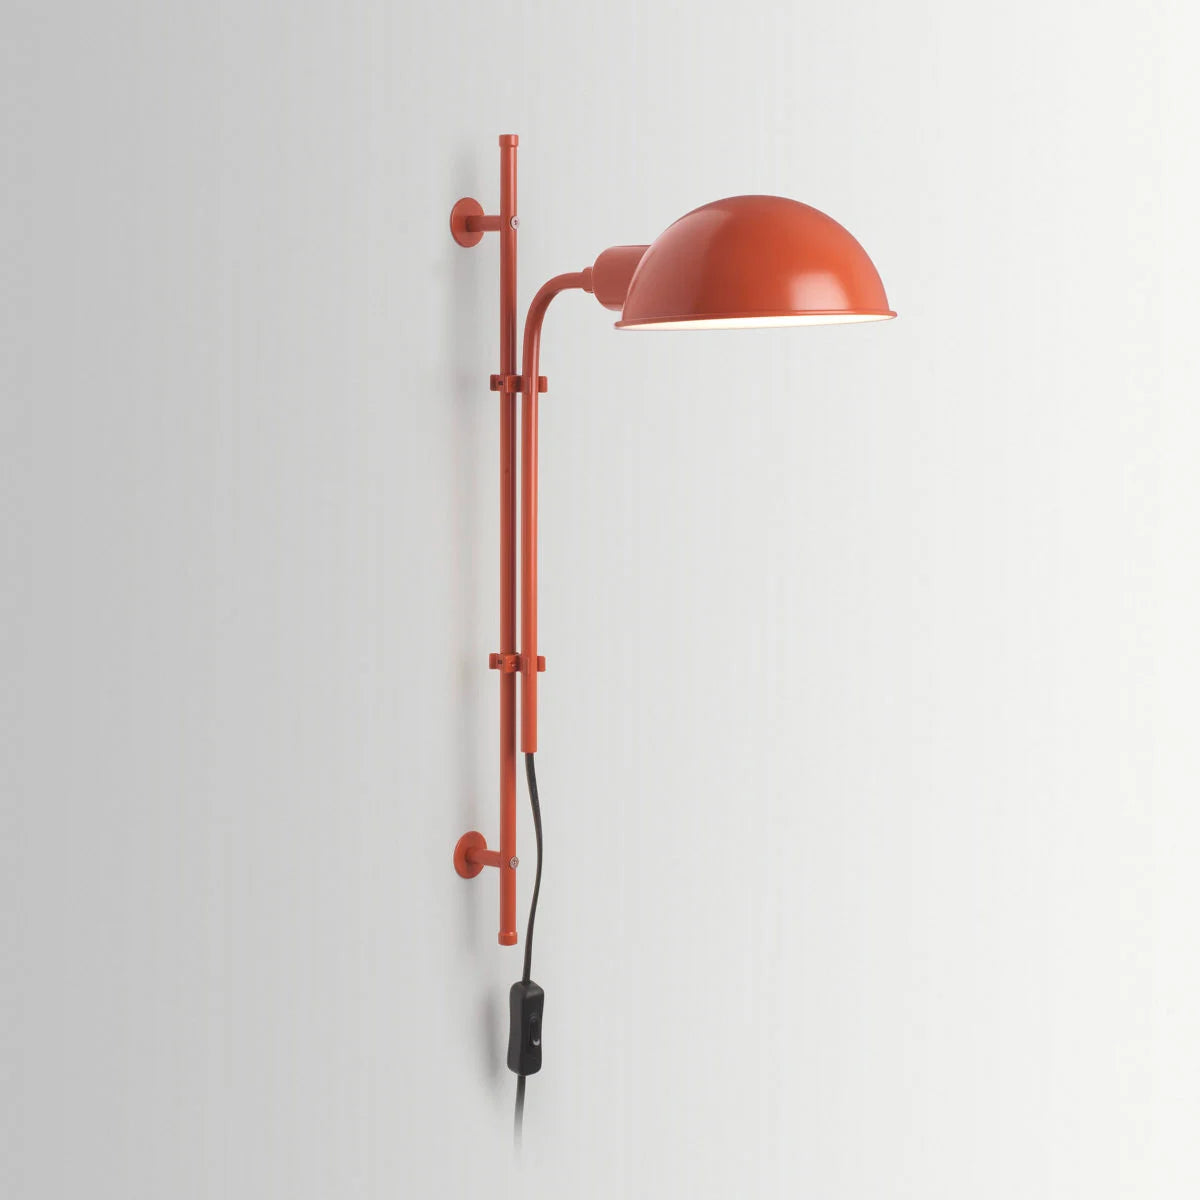 Colorful Practical Wall lamps Task light for Bedroom , Study room by Marset, Spain 